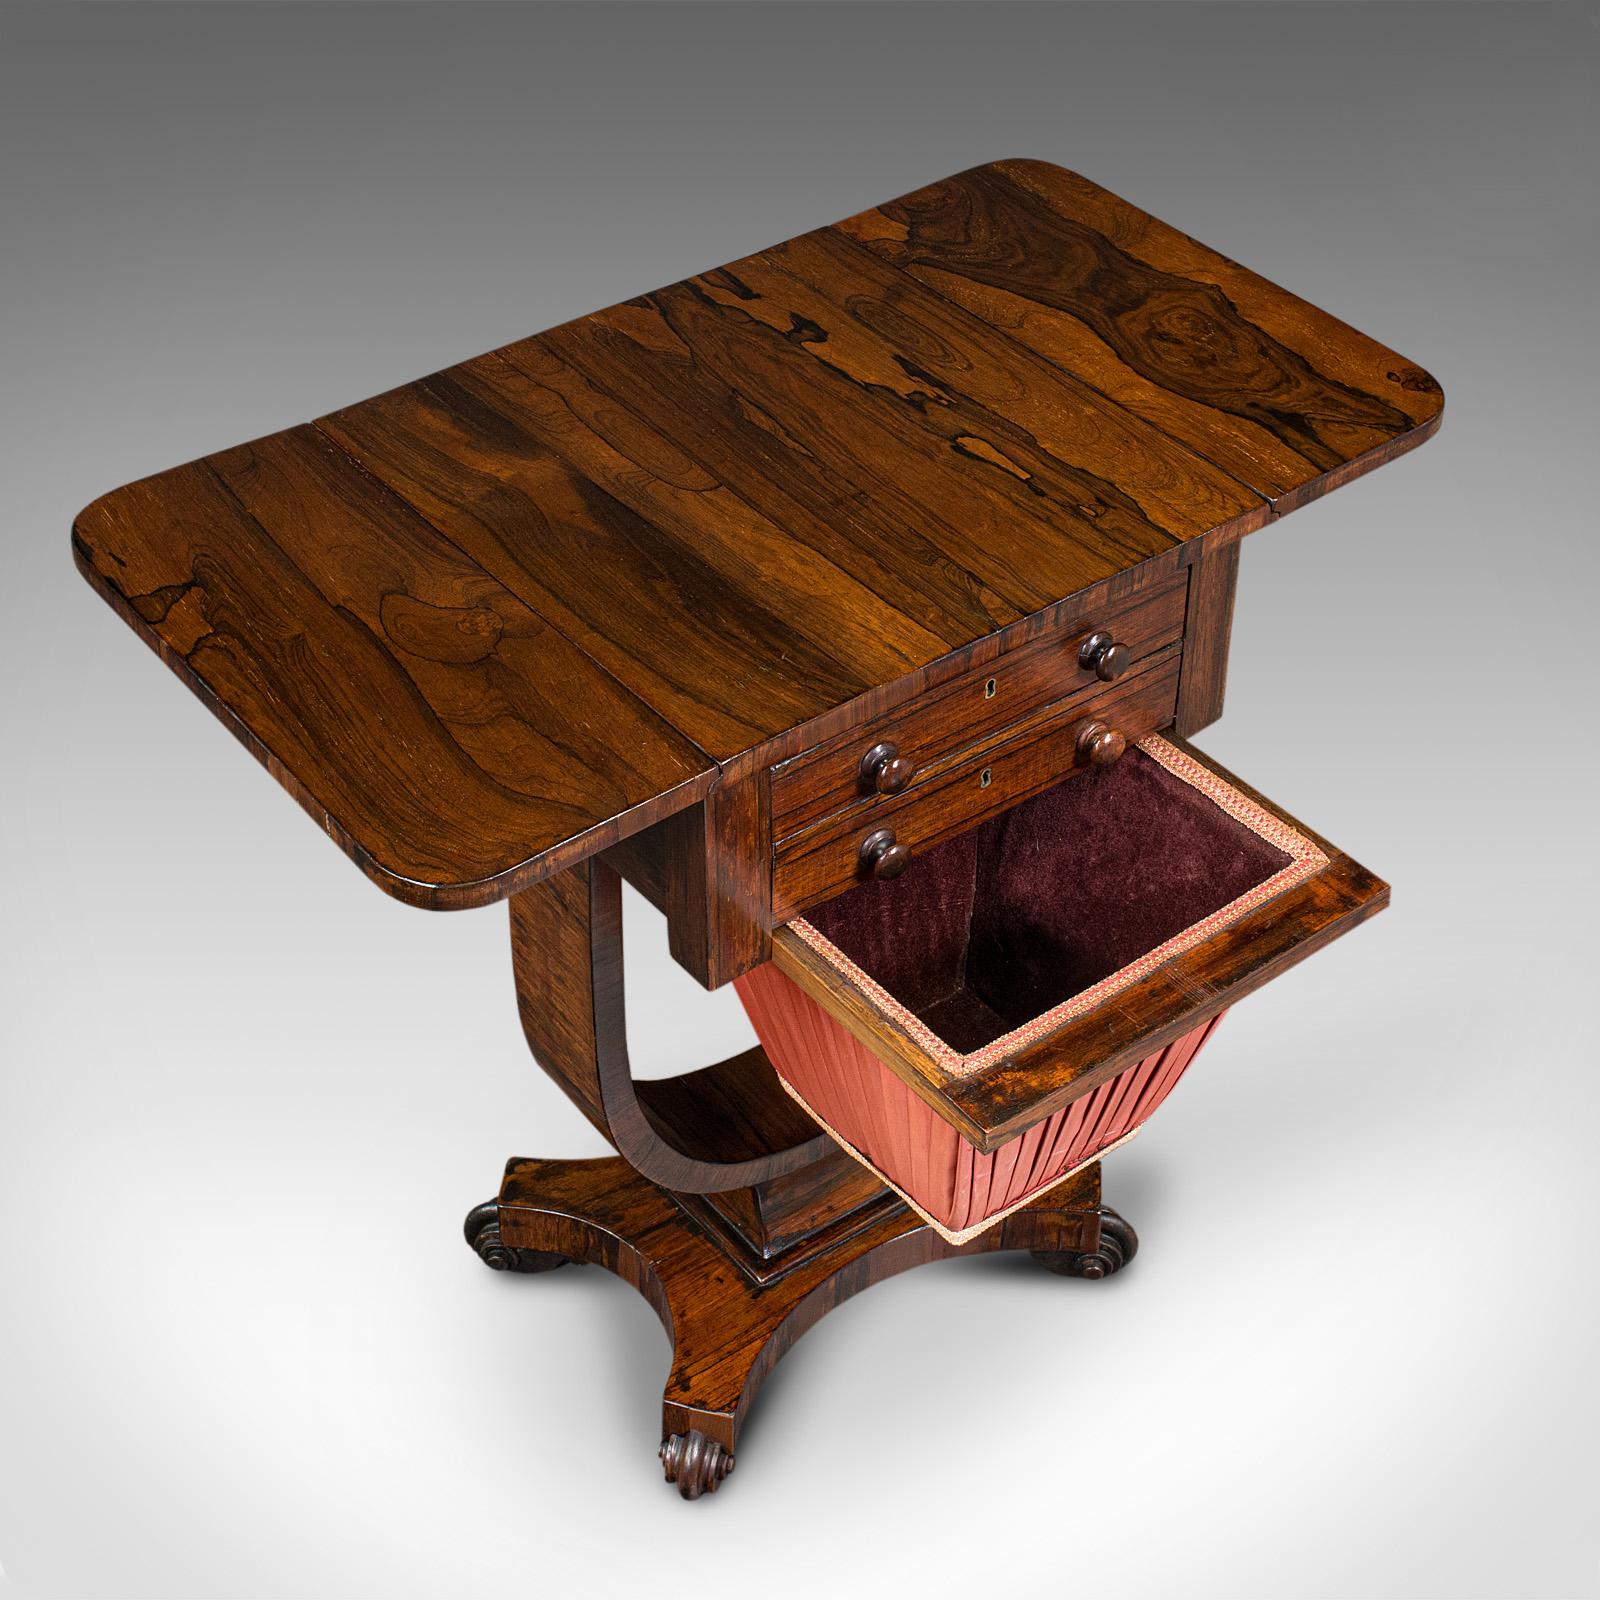 Antique Drop Leaf Ladies Work Table, English, Sewing, Side, William IV, C.1835 For Sale 2